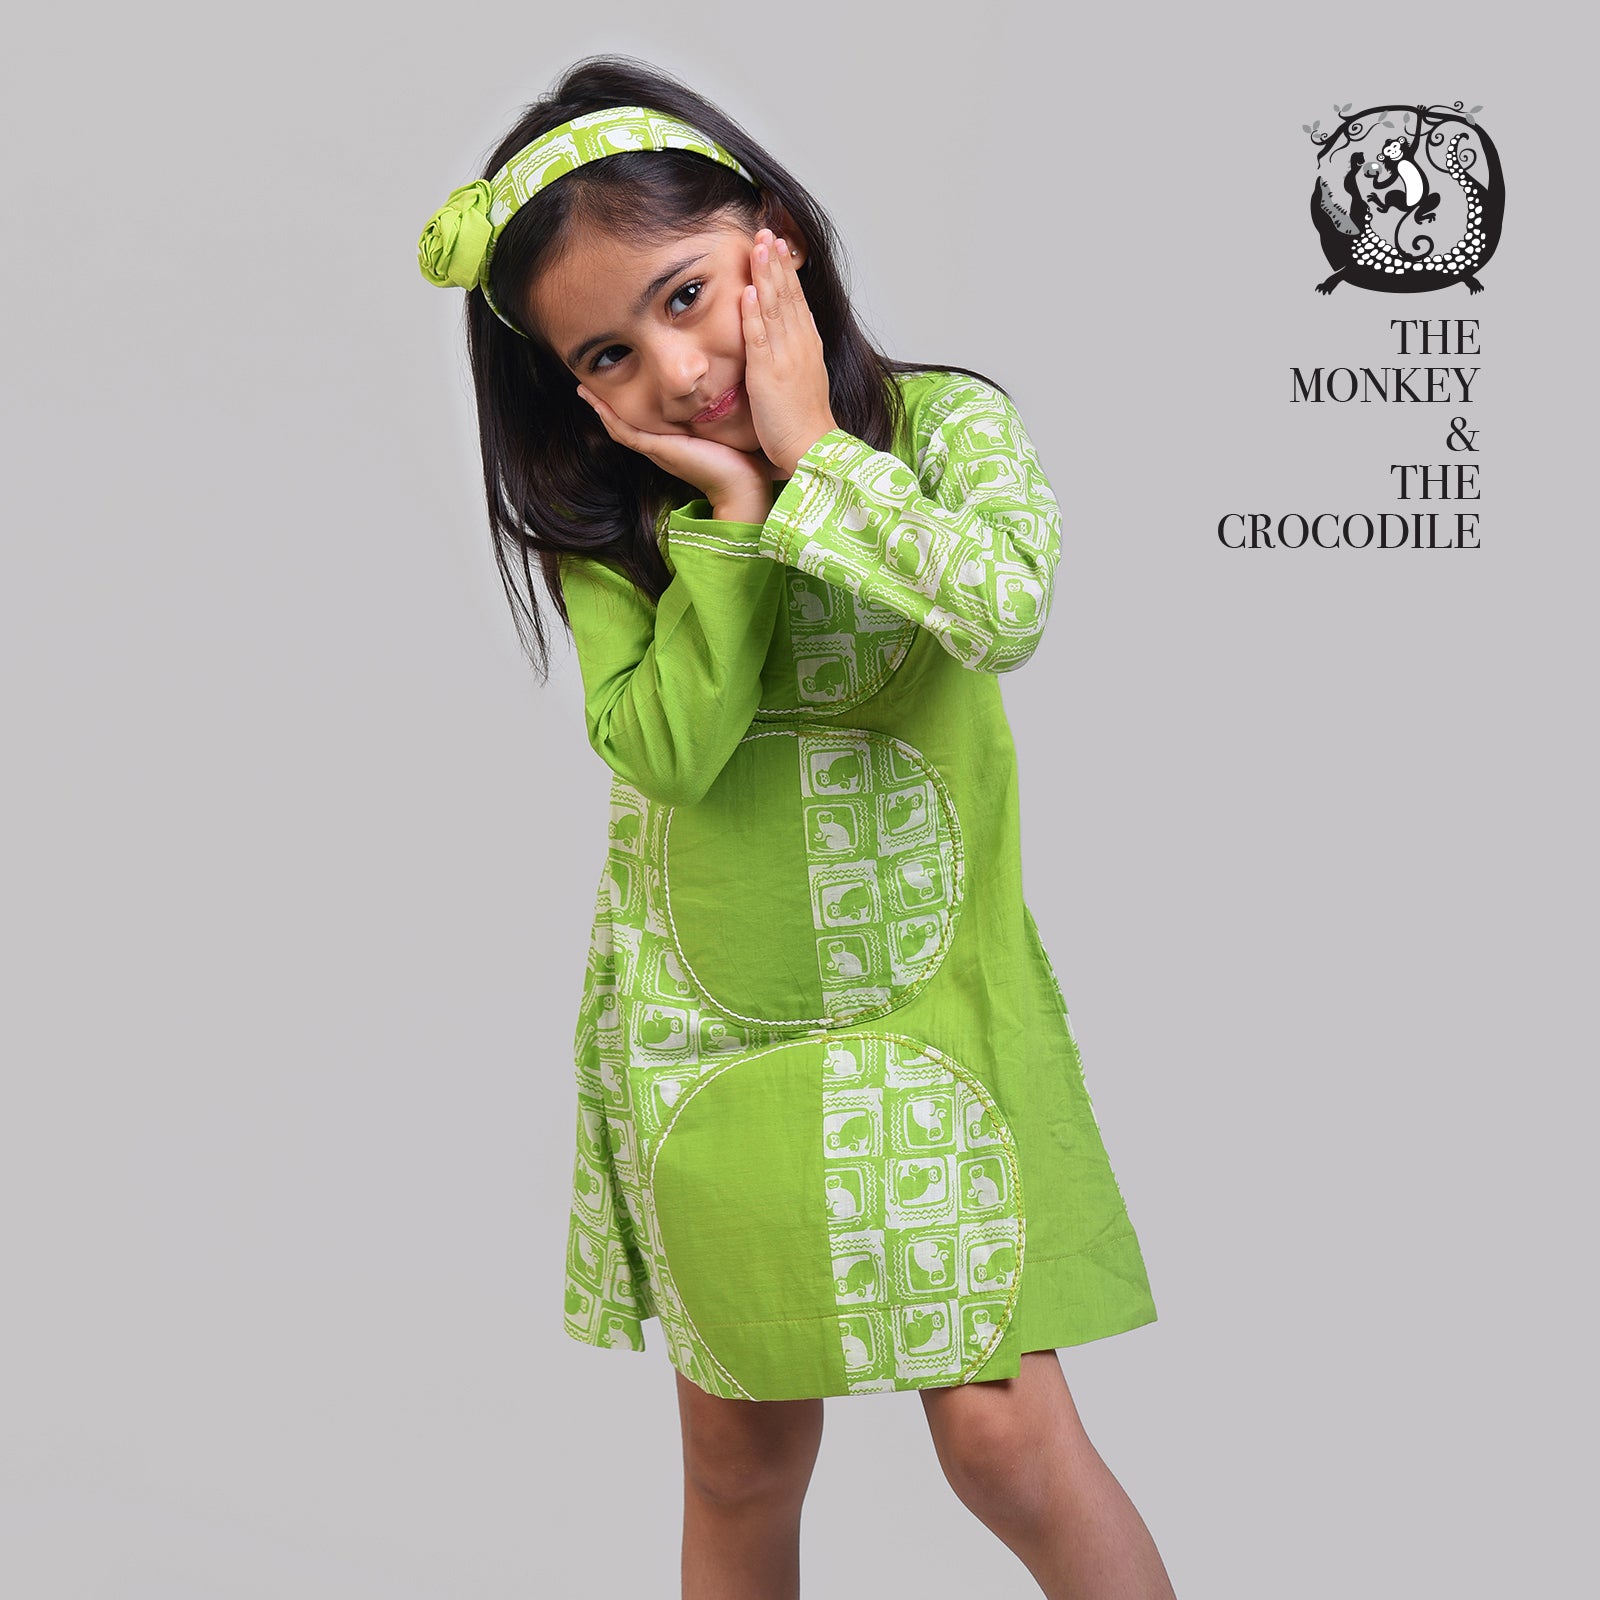 Cotton Yin & Yang Frock with The Monkey & The Crocodile Print